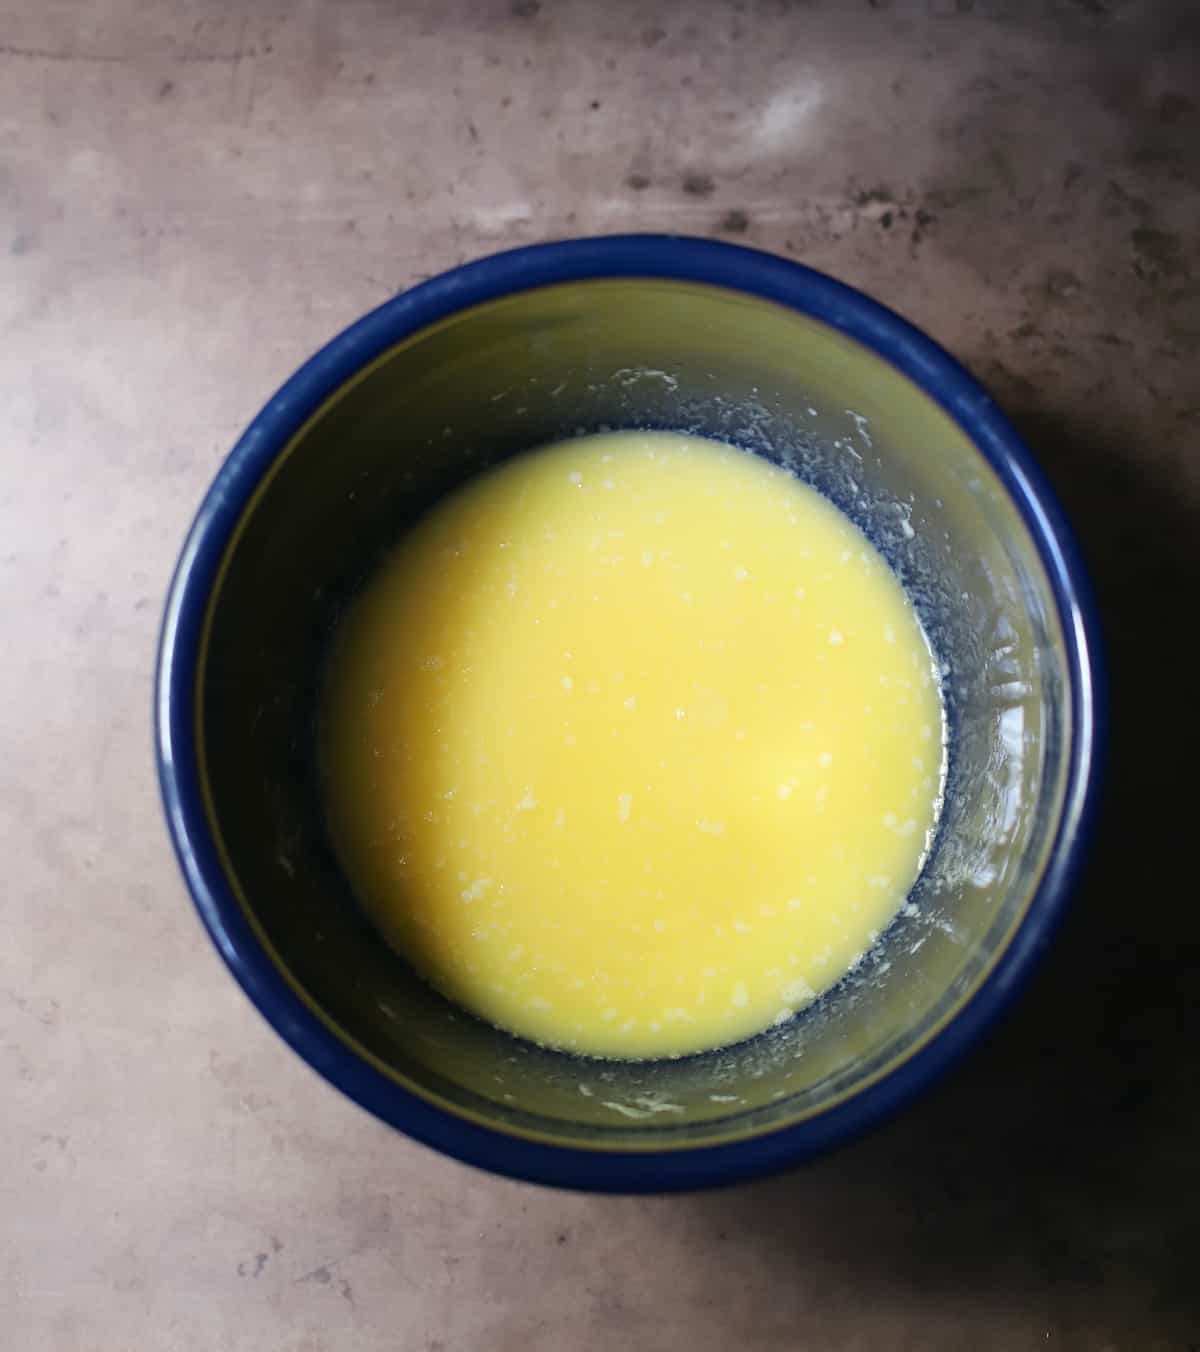 Sugar, eggs, vanilla, lemon juice, and milk in a blue bowl on a table.